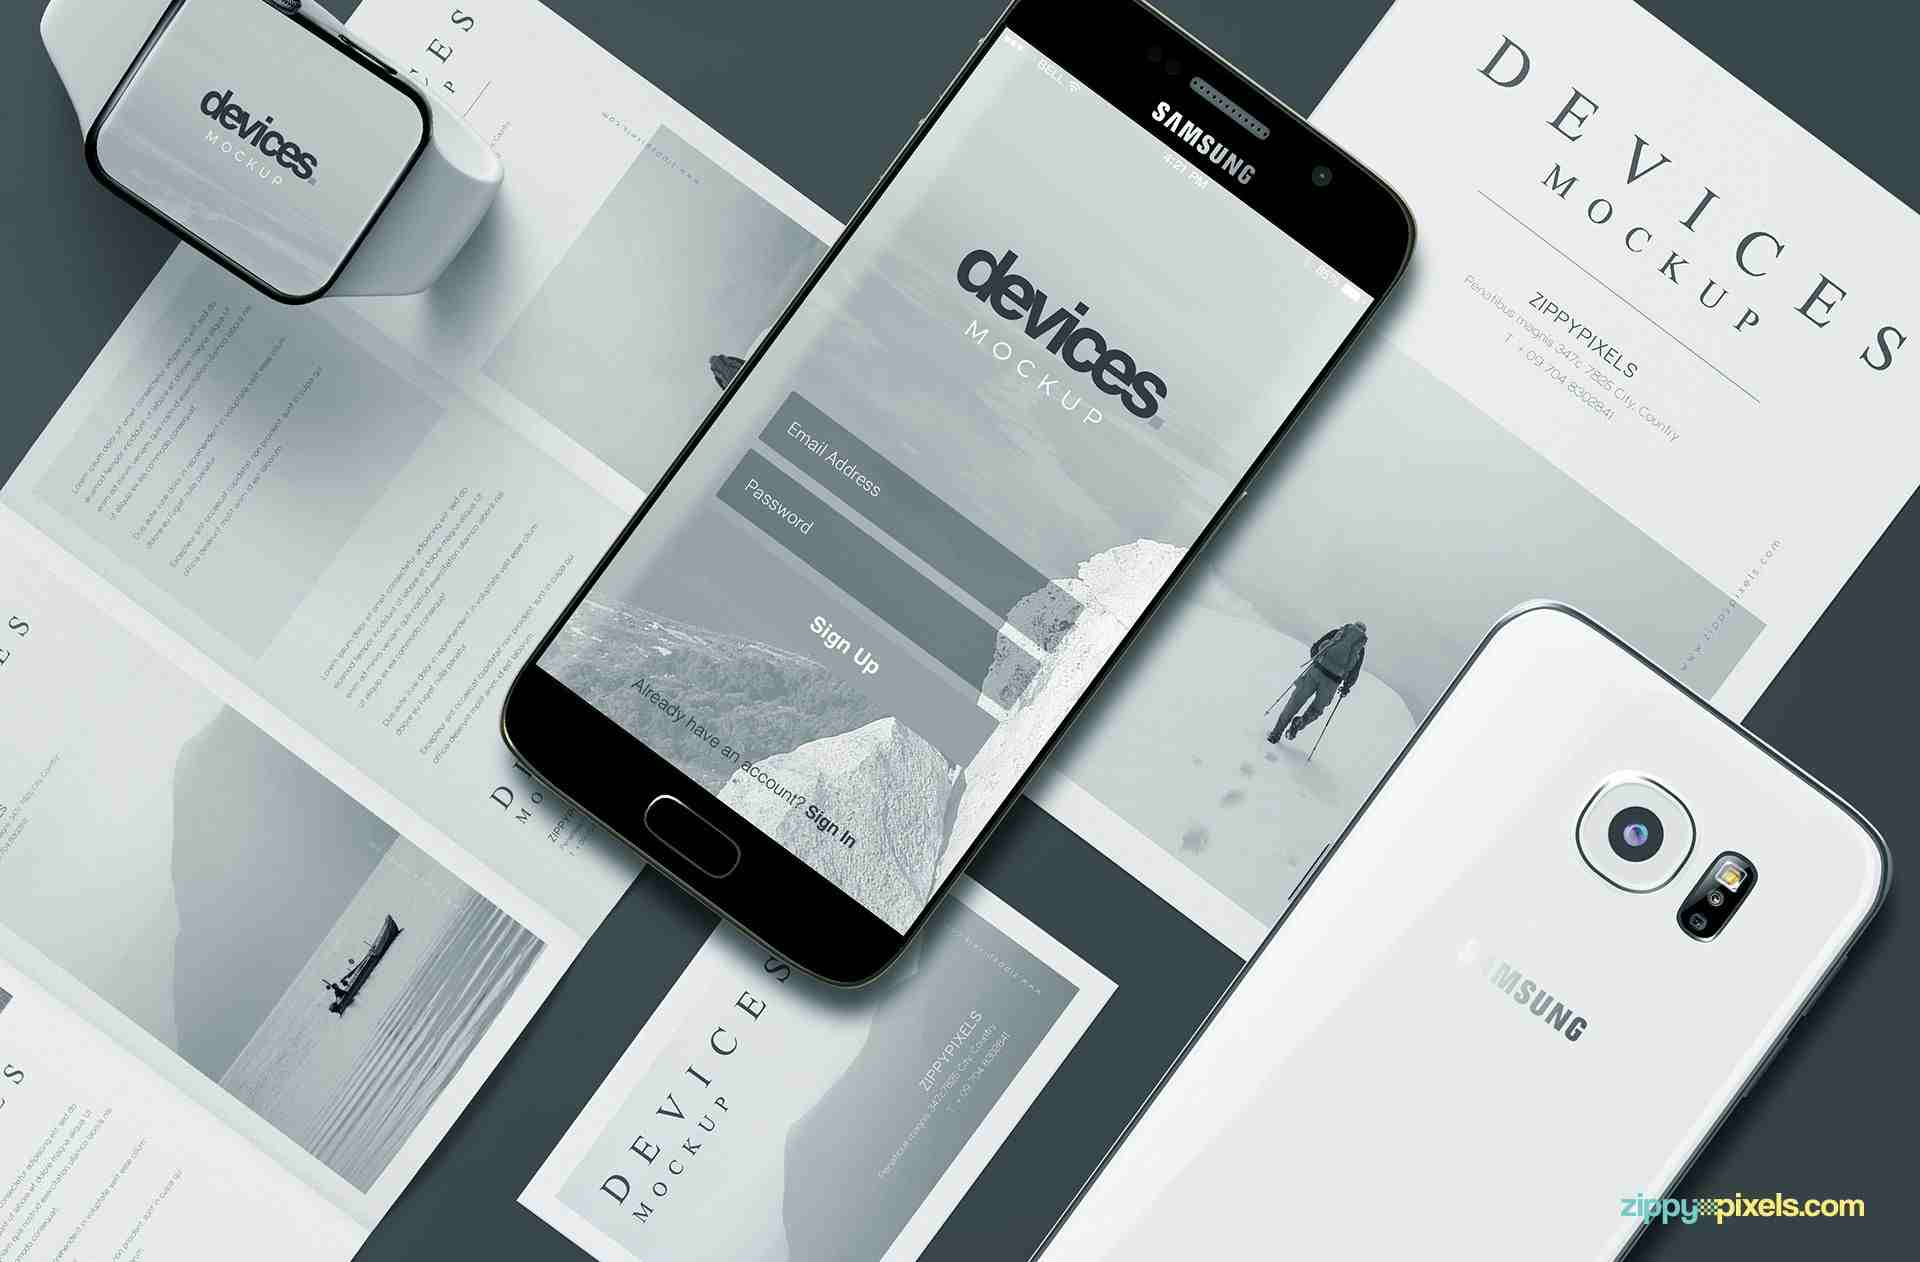 Download 30 Best Free Android Mockup Templates And Mockup Tools In 2020 Updated